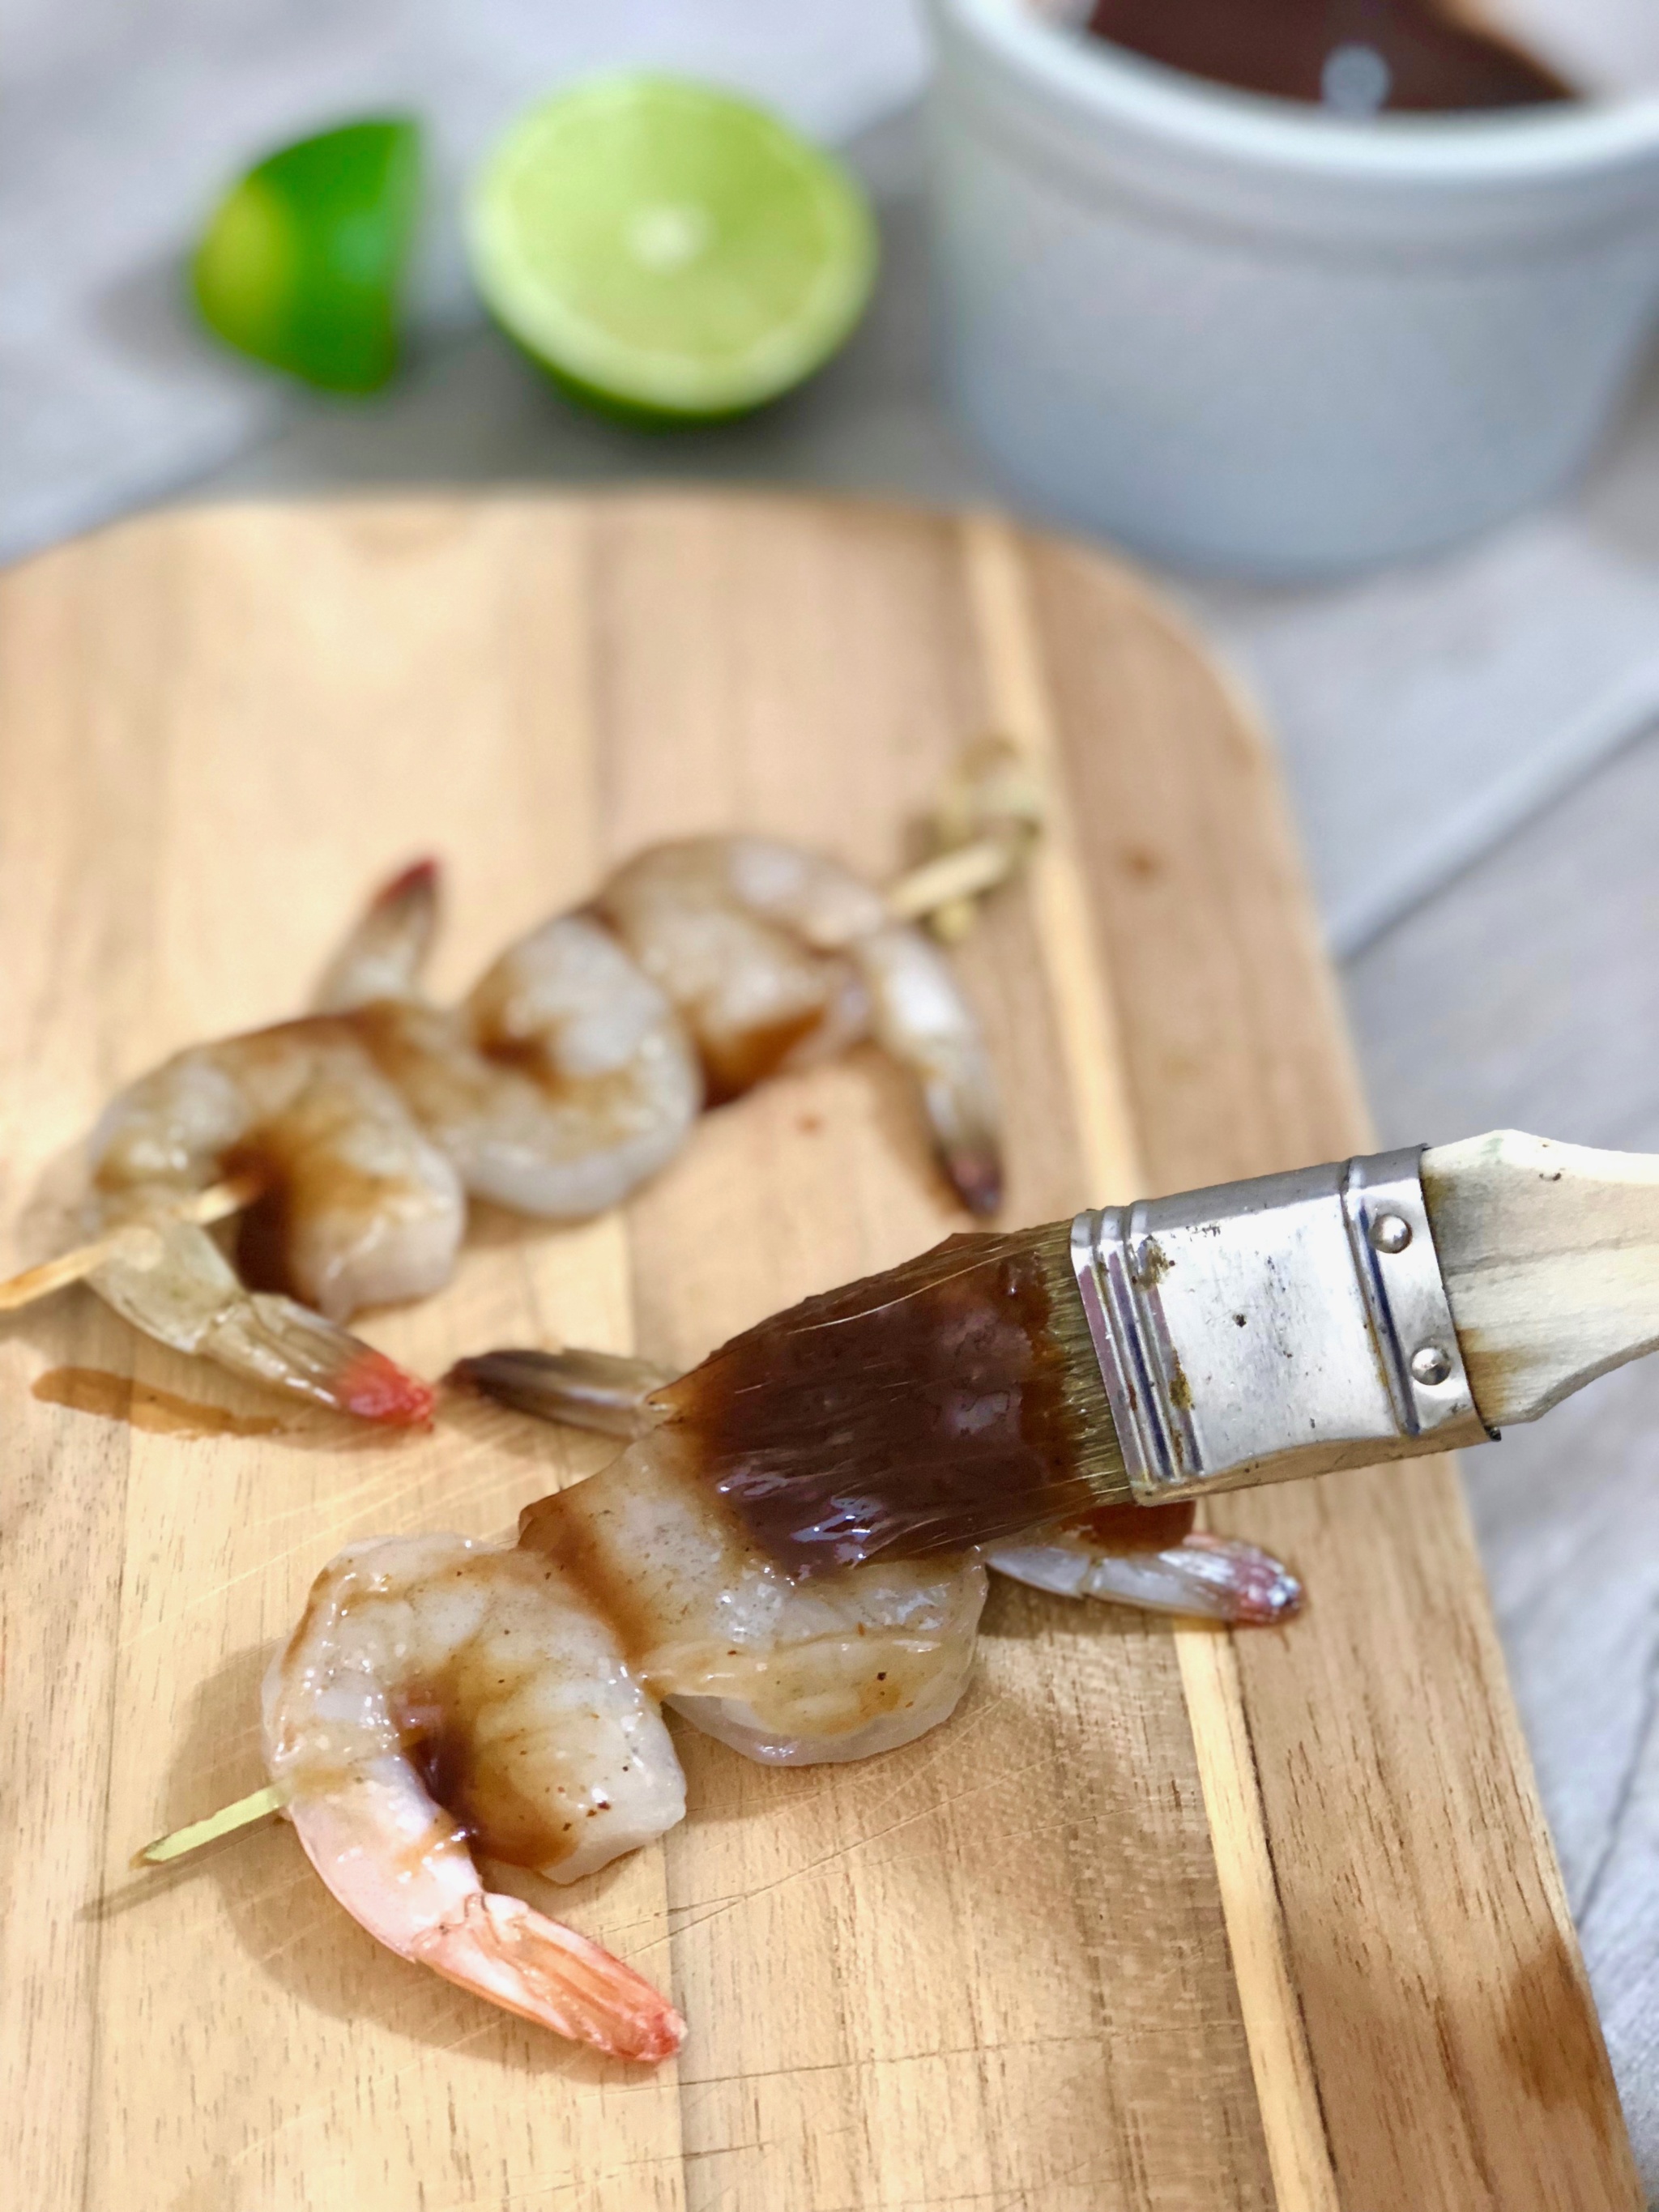 Chipotle Barbecue Shrimp Skewers with Blue Cheese Avocado Sauce